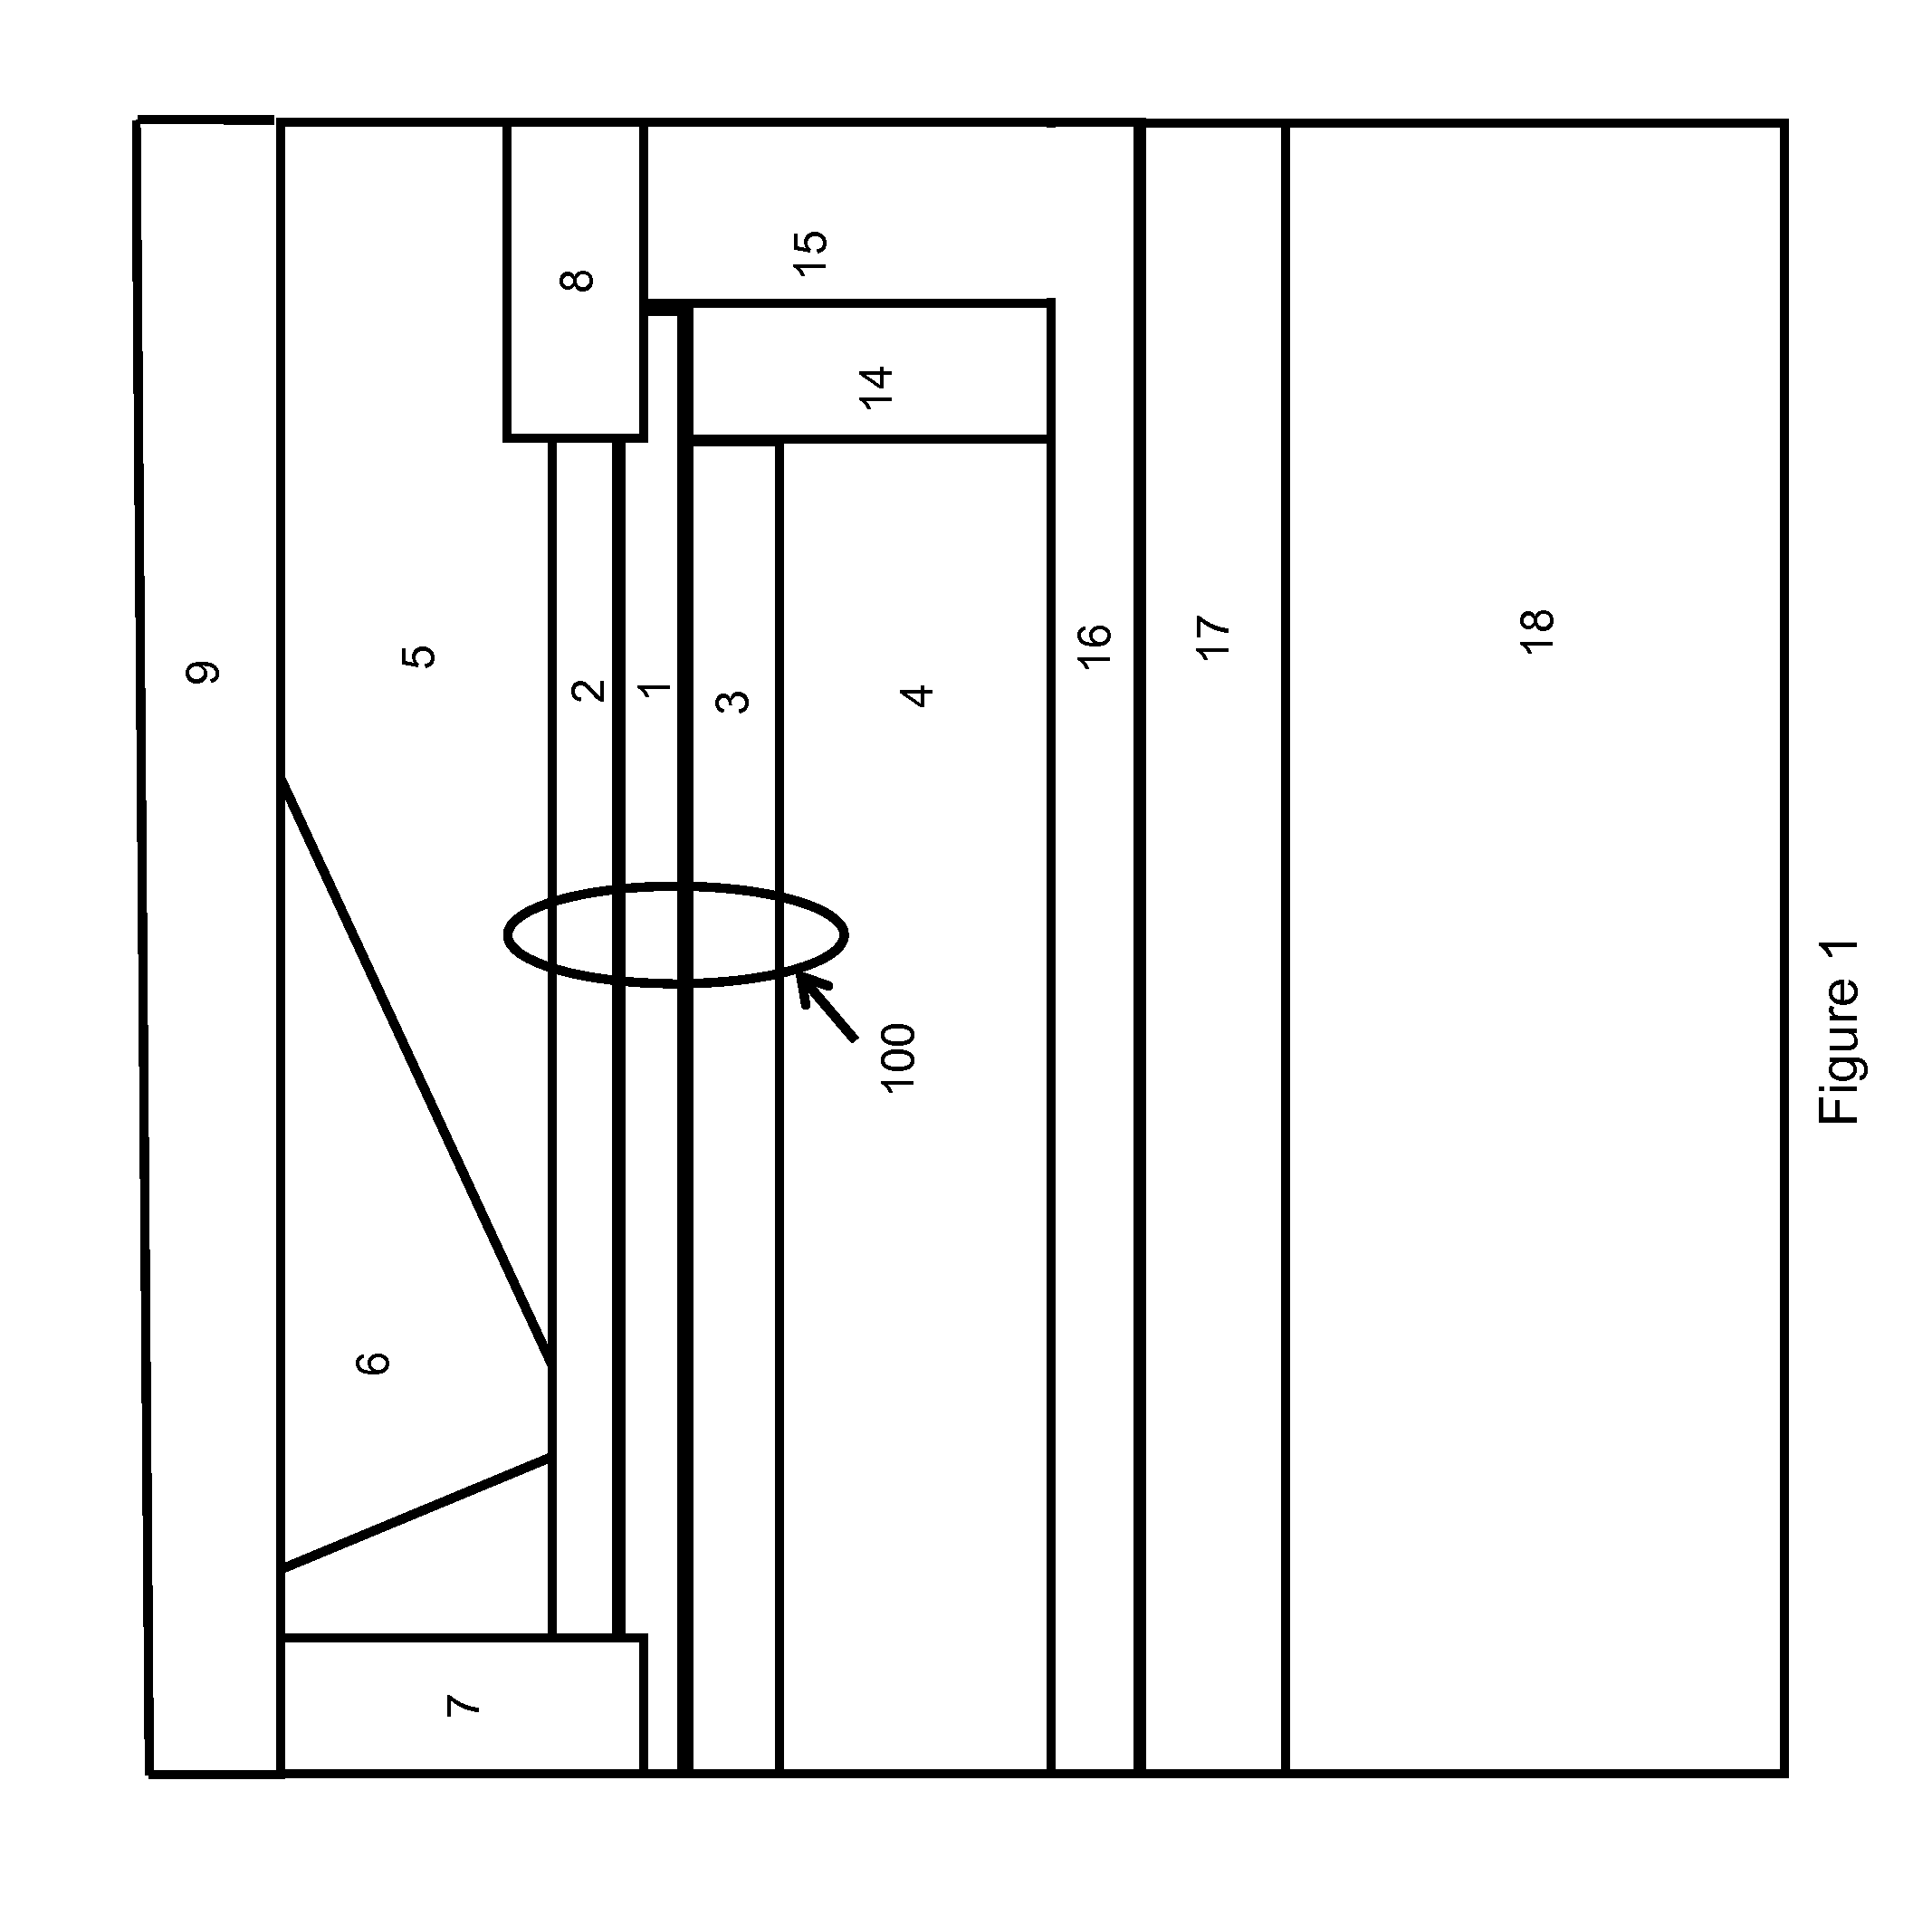 Methods of forming reverse side engineered III-nitride devices